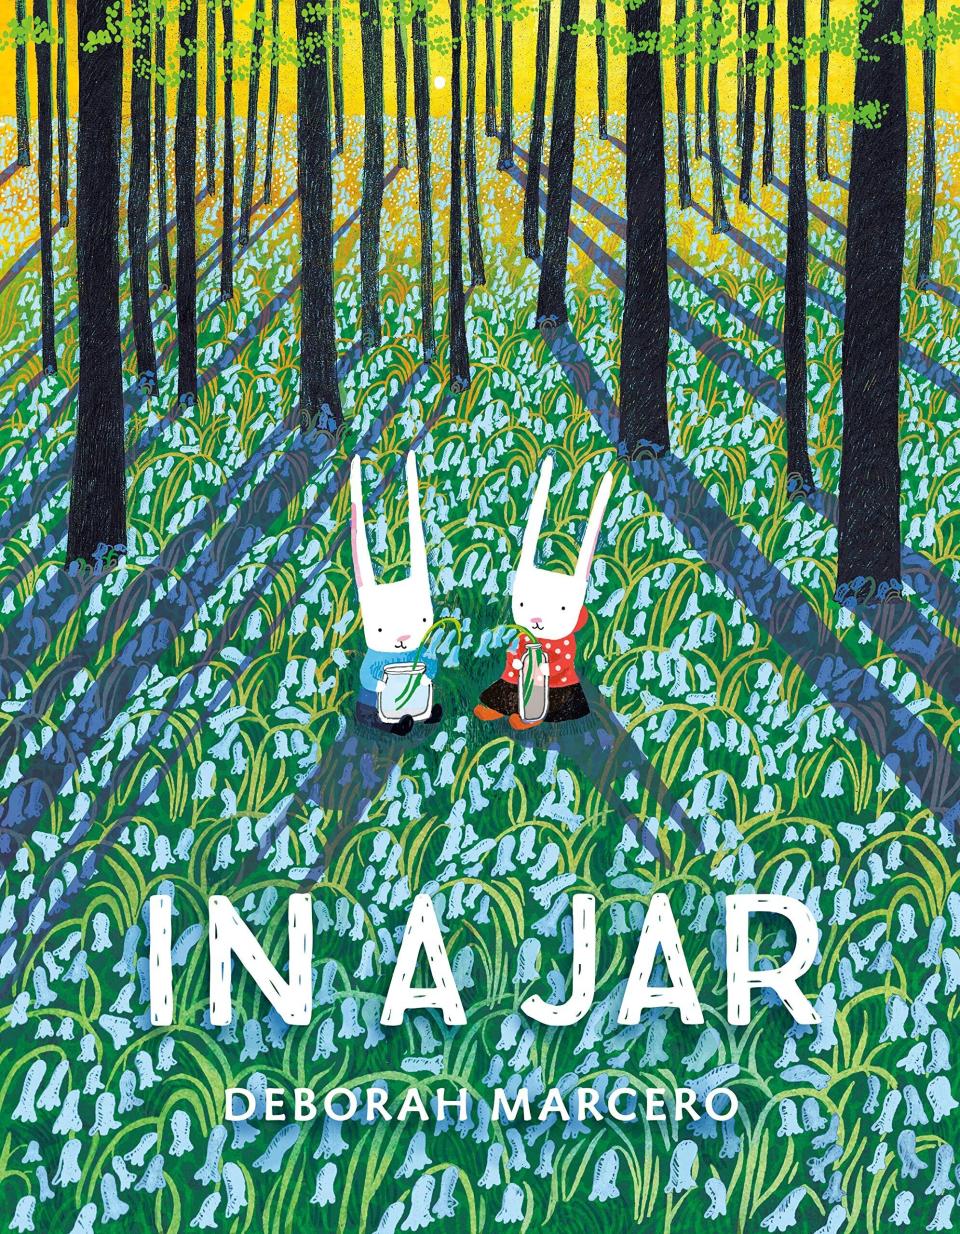 "In A Jar" focuses on cherishing memories, keeping friendships alive and coping with loneliness. <i>(Available <a href="https://www.amazon.com/Jar-Deborah-Marcero/dp/0525514597" target="_blank" rel="noopener noreferrer">here</a>.)</i>